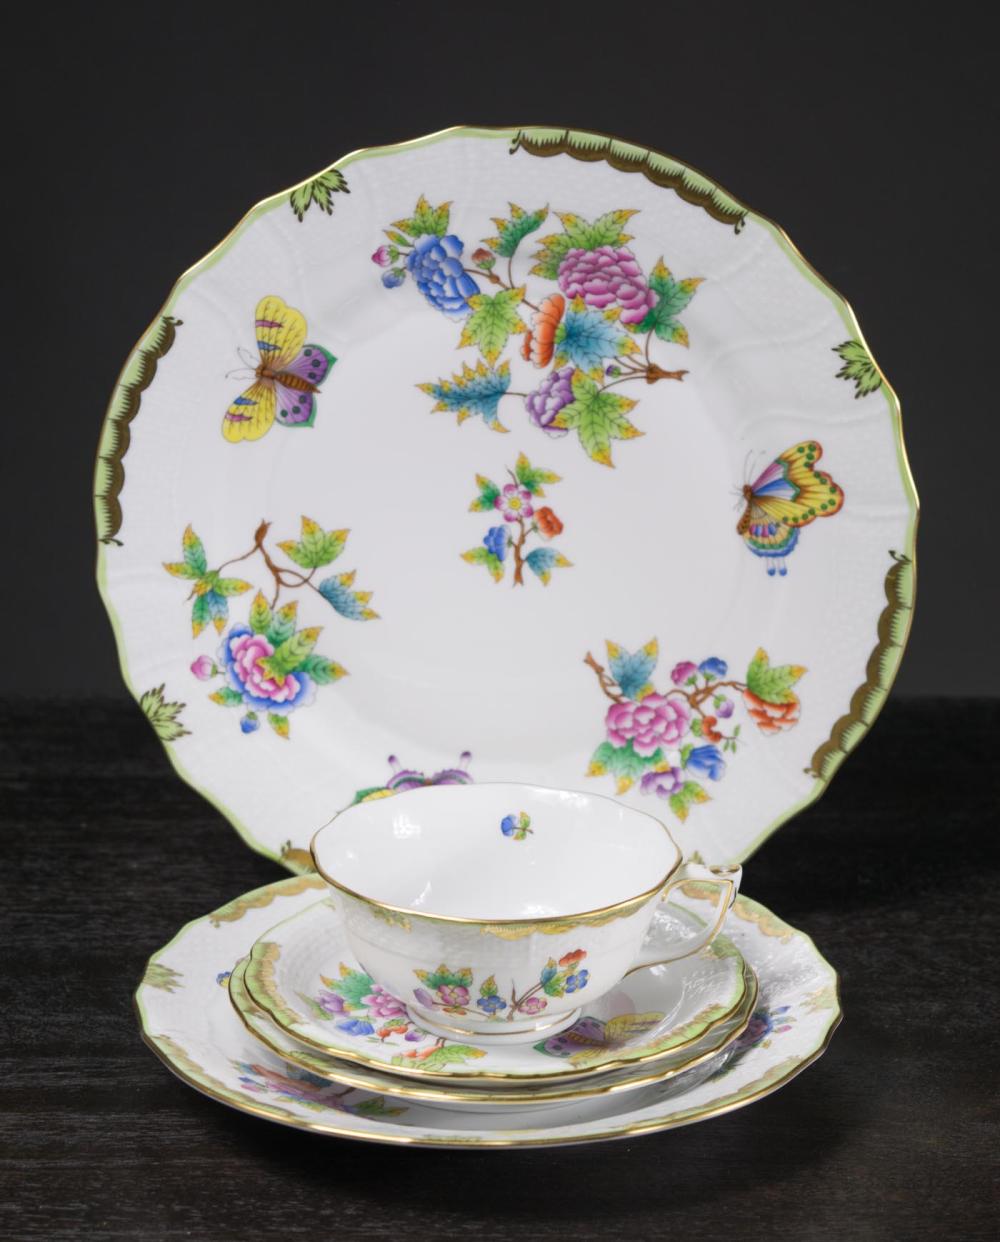 HEREND FINE CHINA DINNER SERVICE SETHEREND